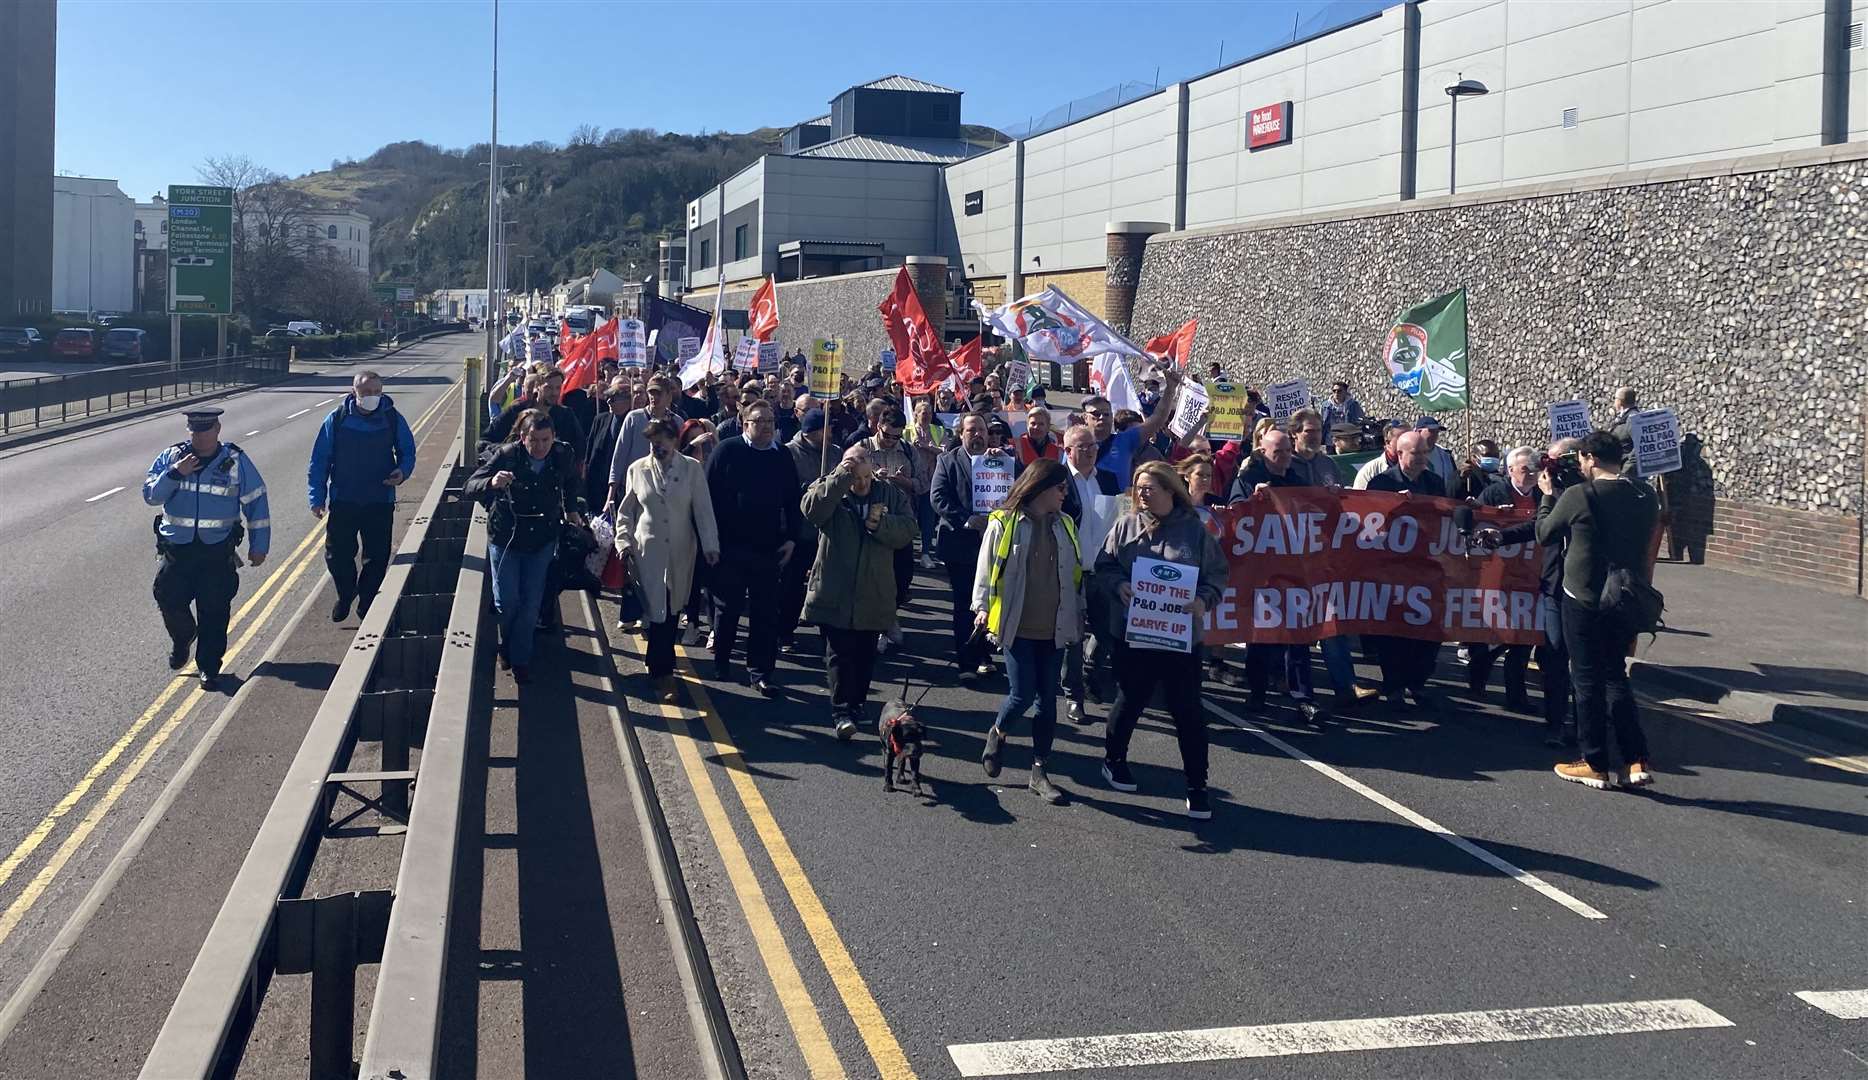 Protests took place in Dover on Friday